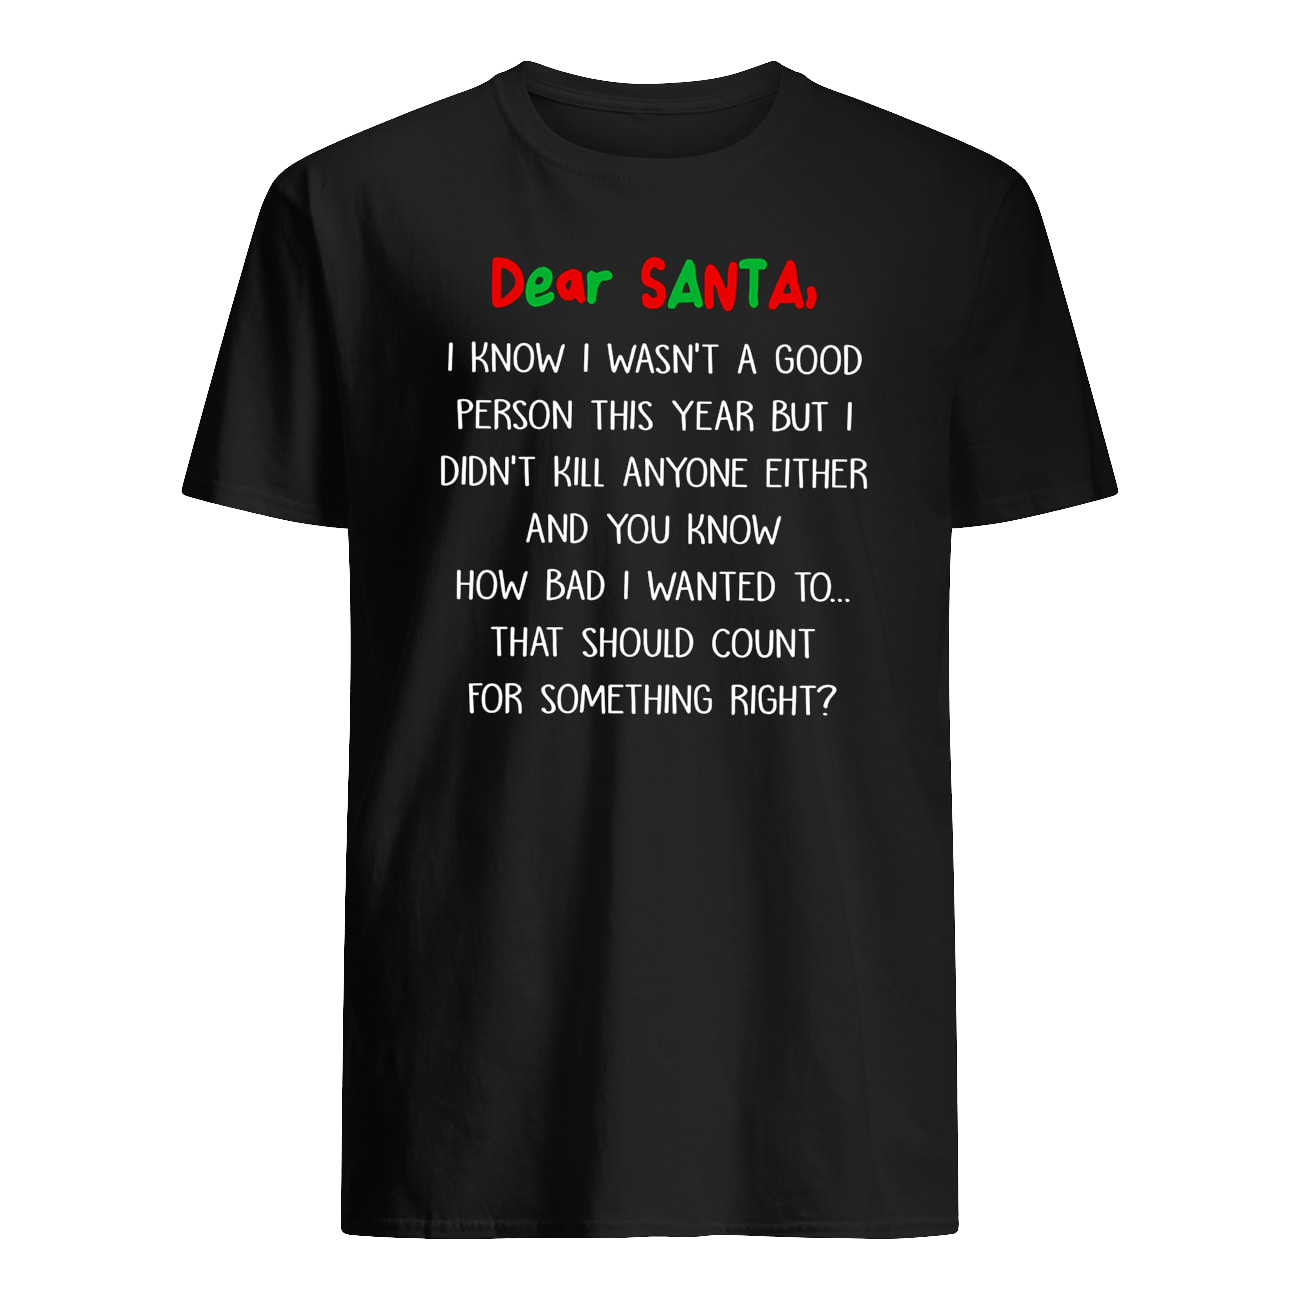 Dear santa I know I wasn't a good person this year but I didn't kill anyone either christmas mens shirt